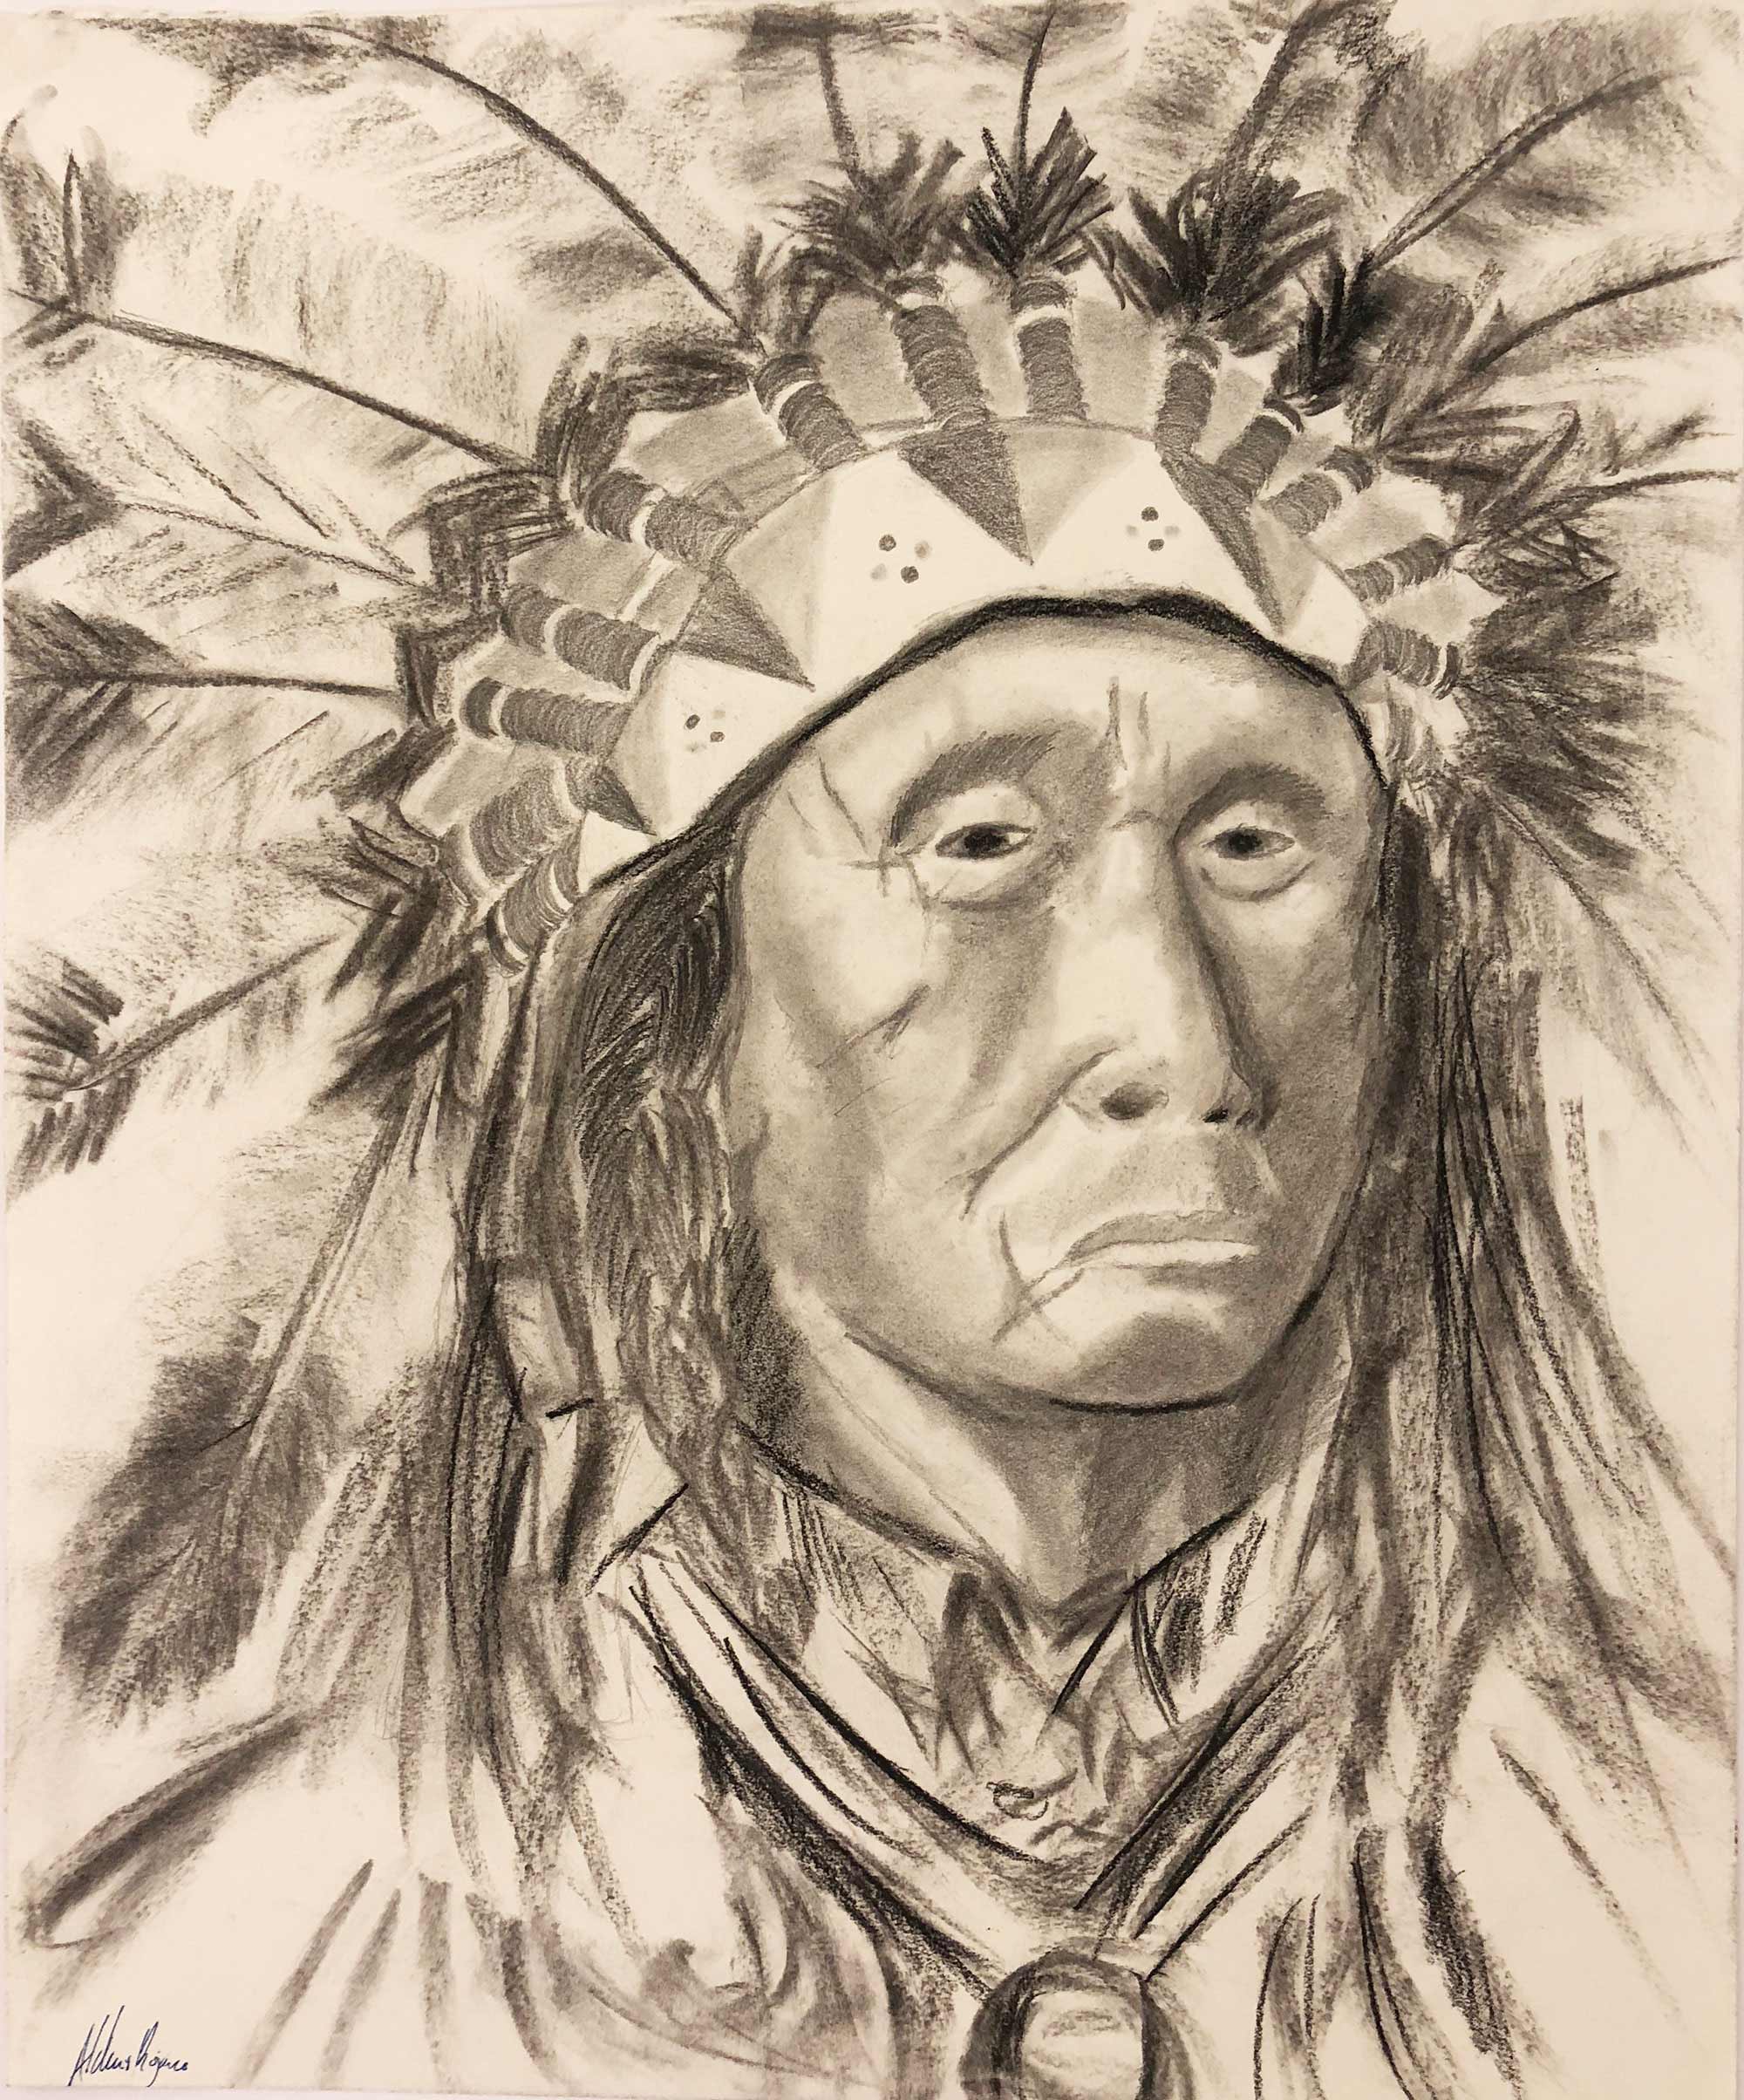 A charcoal drawing of a native American